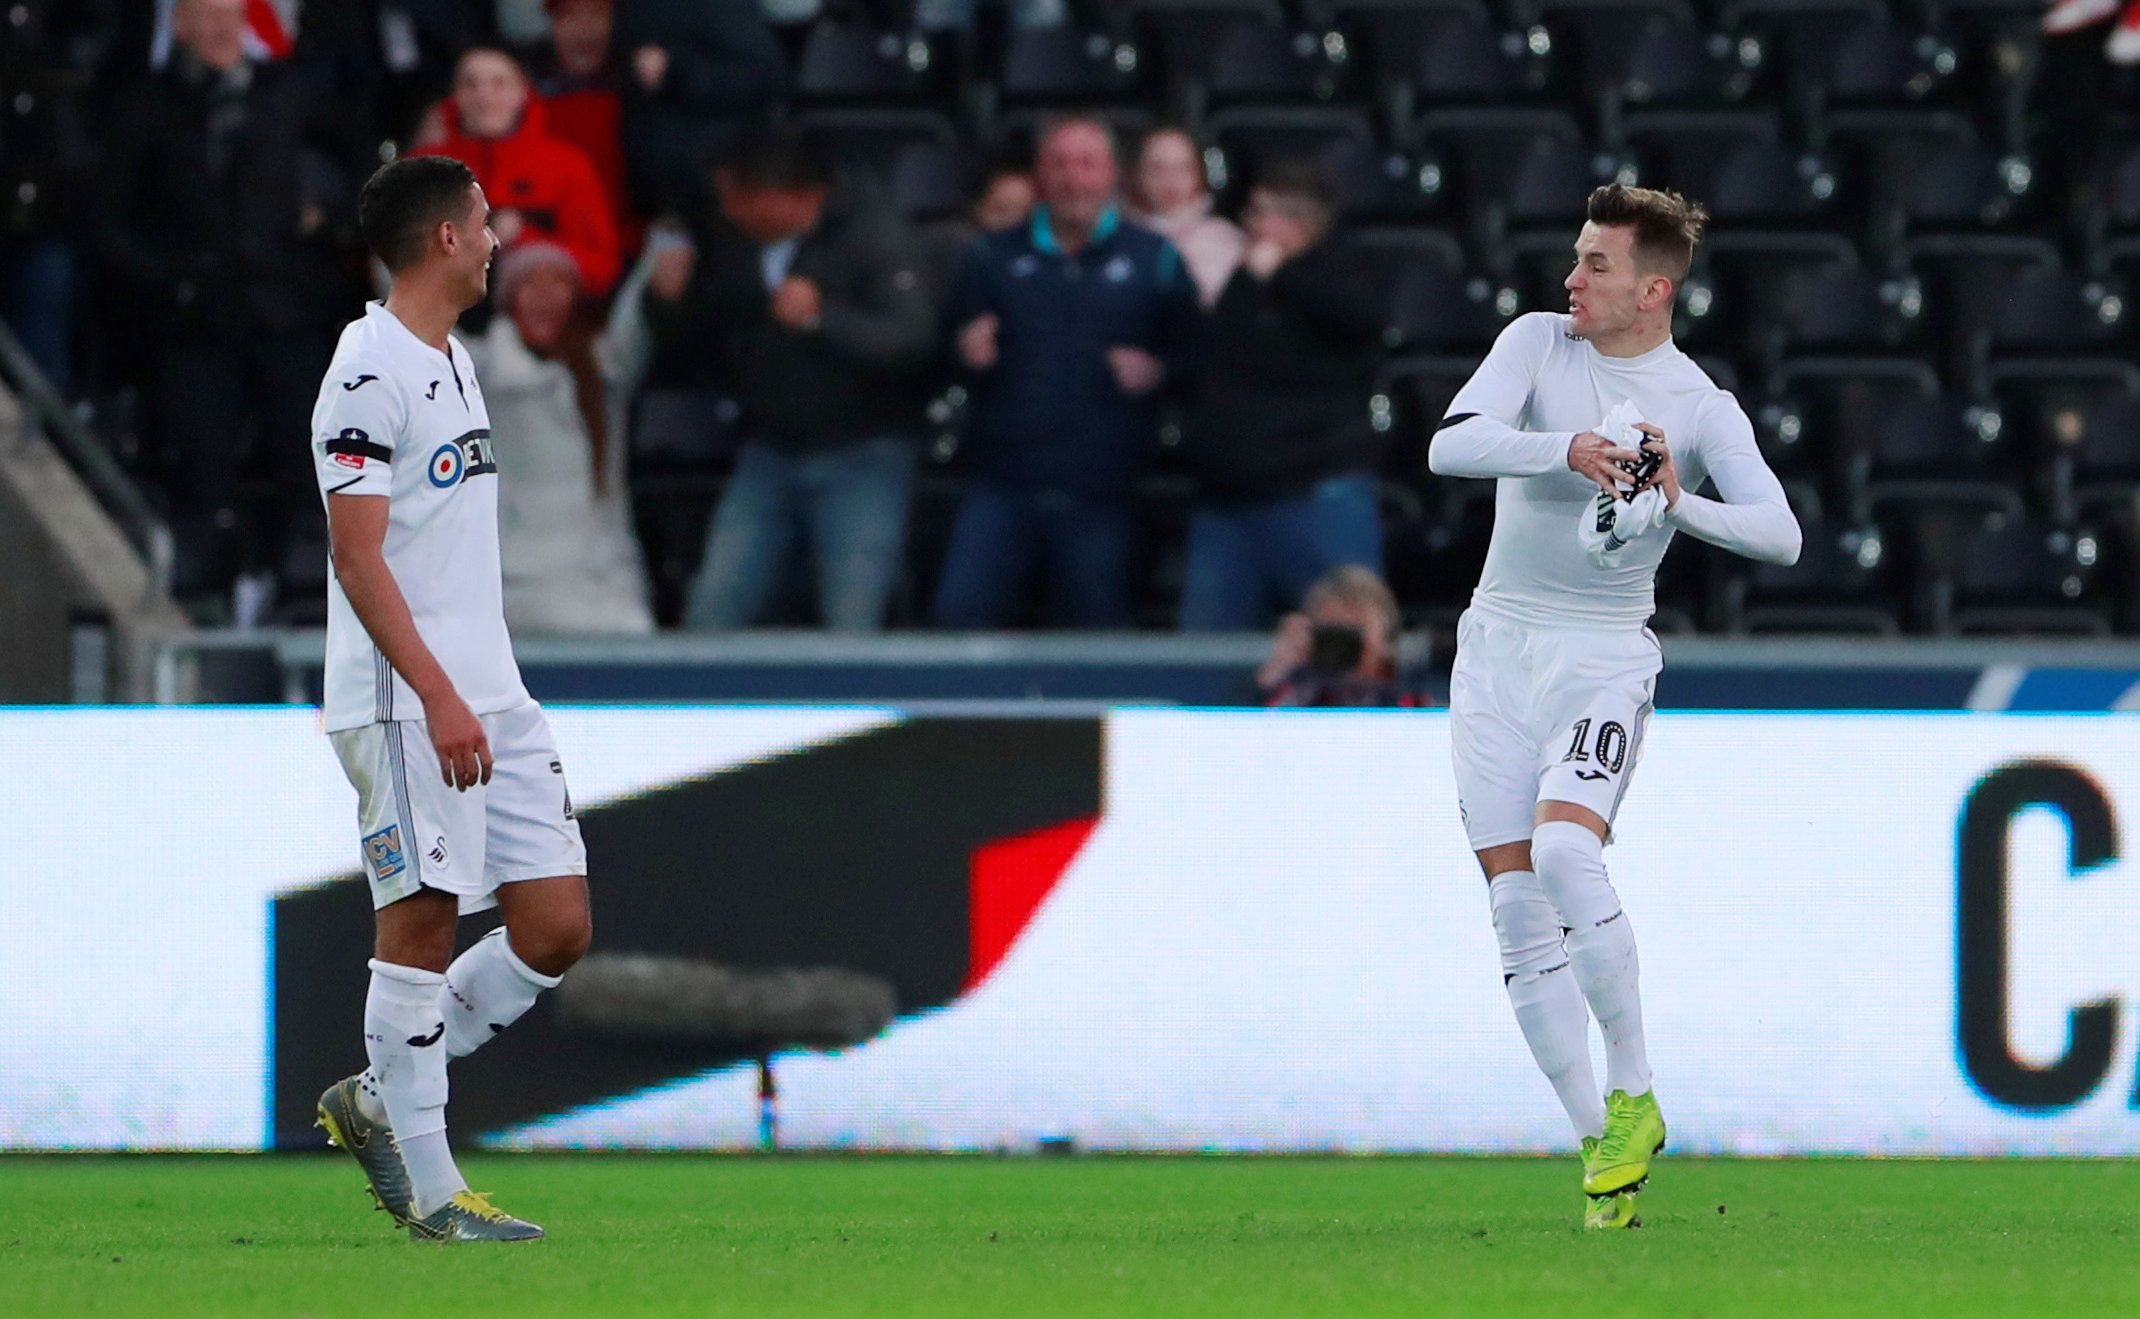 Soccer Football - FA Cup Fifth Round - Swansea City v Brentford, Liberty Stadium, Swansea, Britain - February 17, 2019  Swansea City's Bersant Celina celebrates scoring their third goal    Action Images via Reuters/Andrew Couldridge